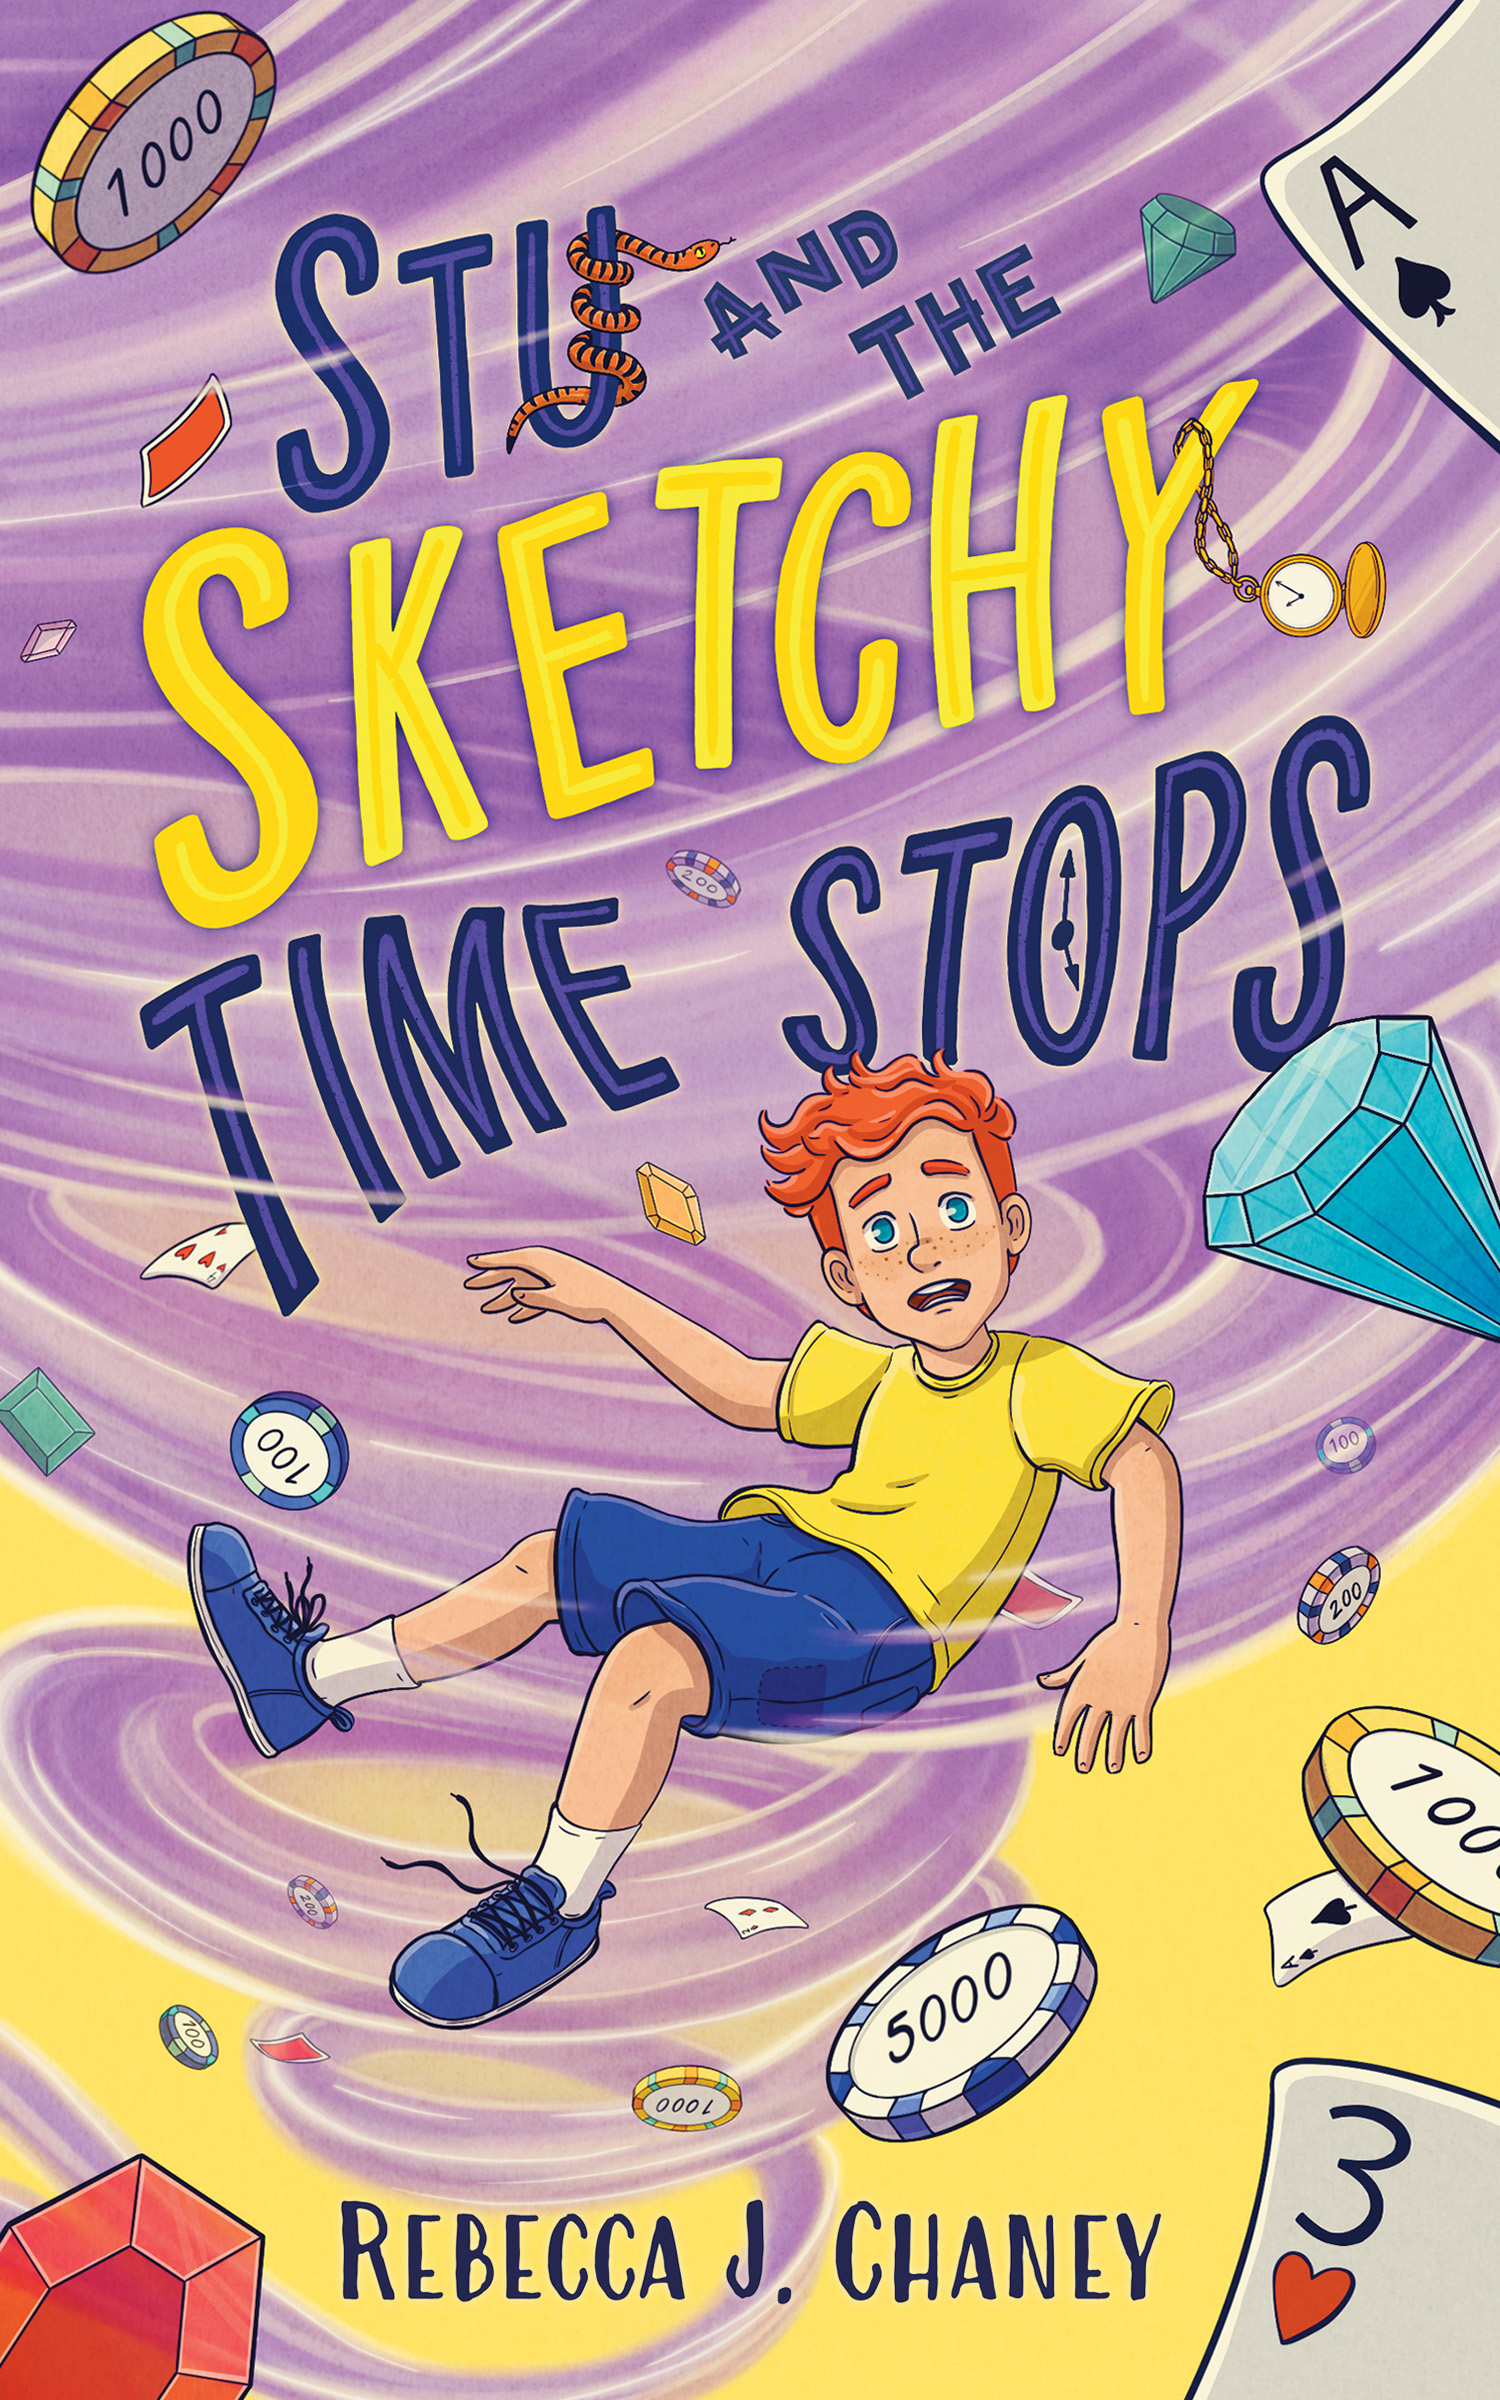 Book Cover of Stu and the Sketchy Time Stops showing a boy, casino chips, and playing cards swirling in a purple tornado.